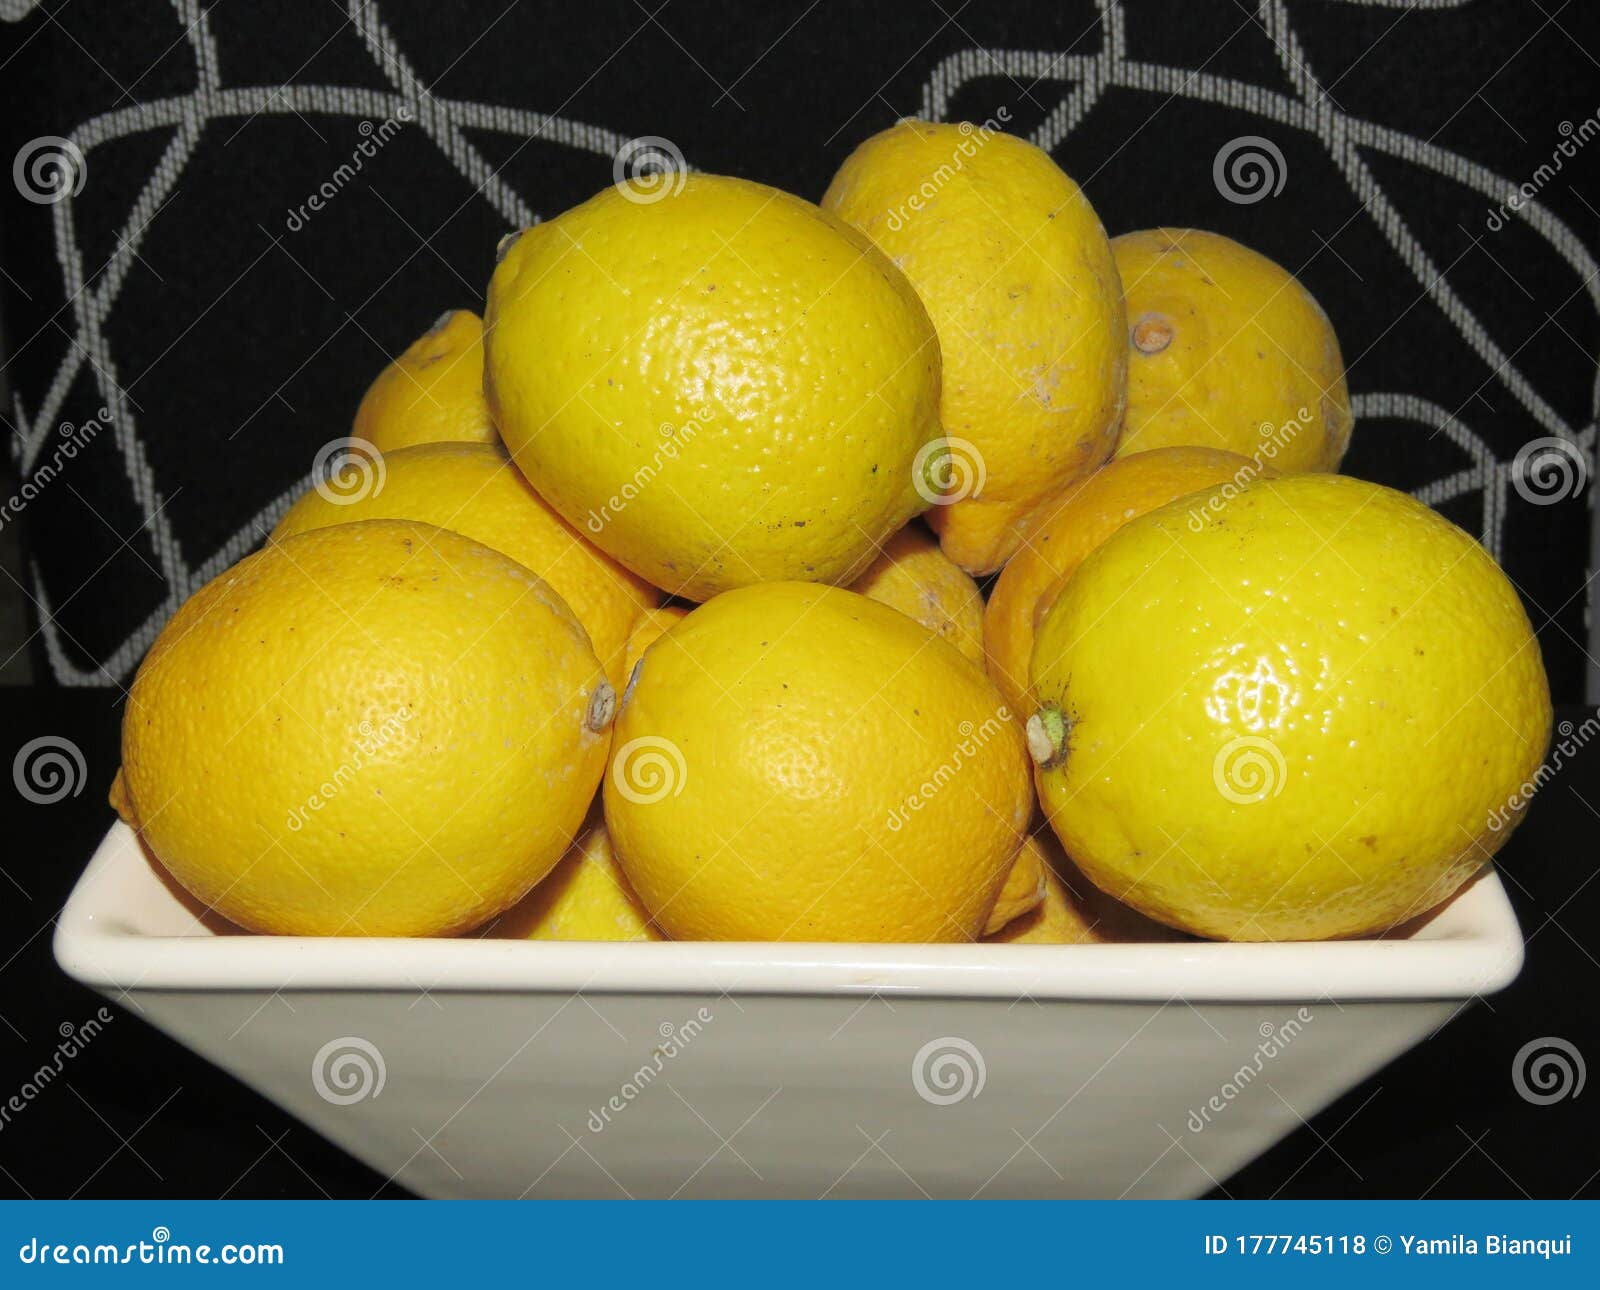 stack of imperfect lemons on black and white background